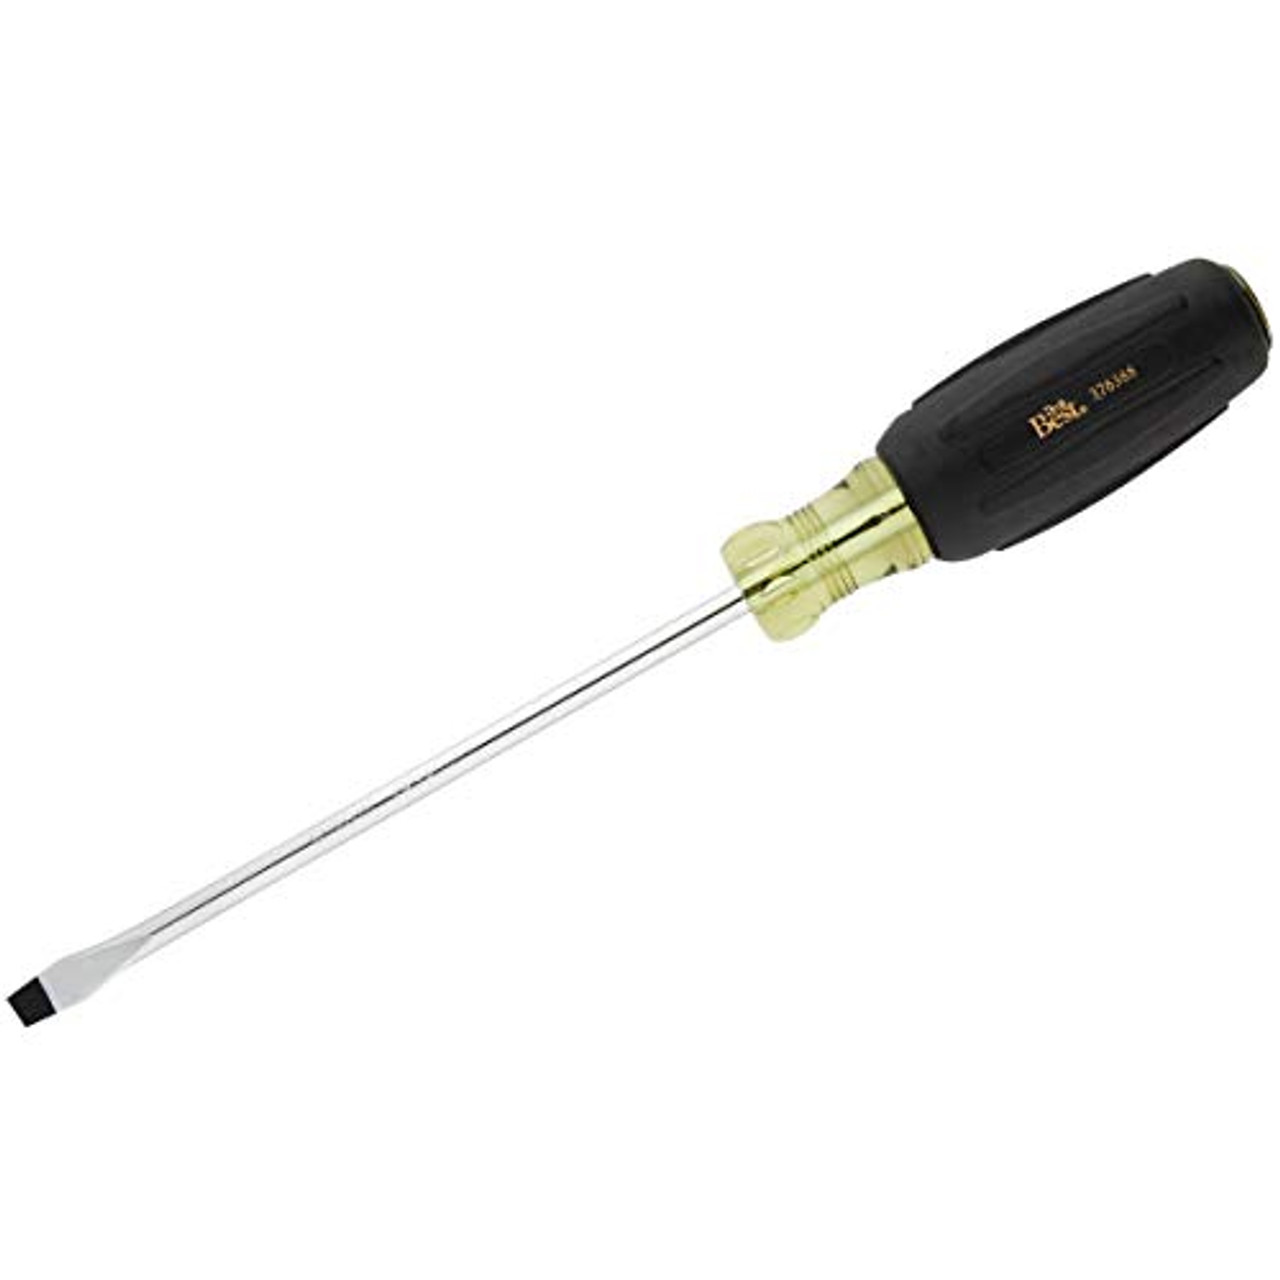 Do it Best 376388 Professional Cushion-Grip Slotted Screwdriver, 1/4" x 6"